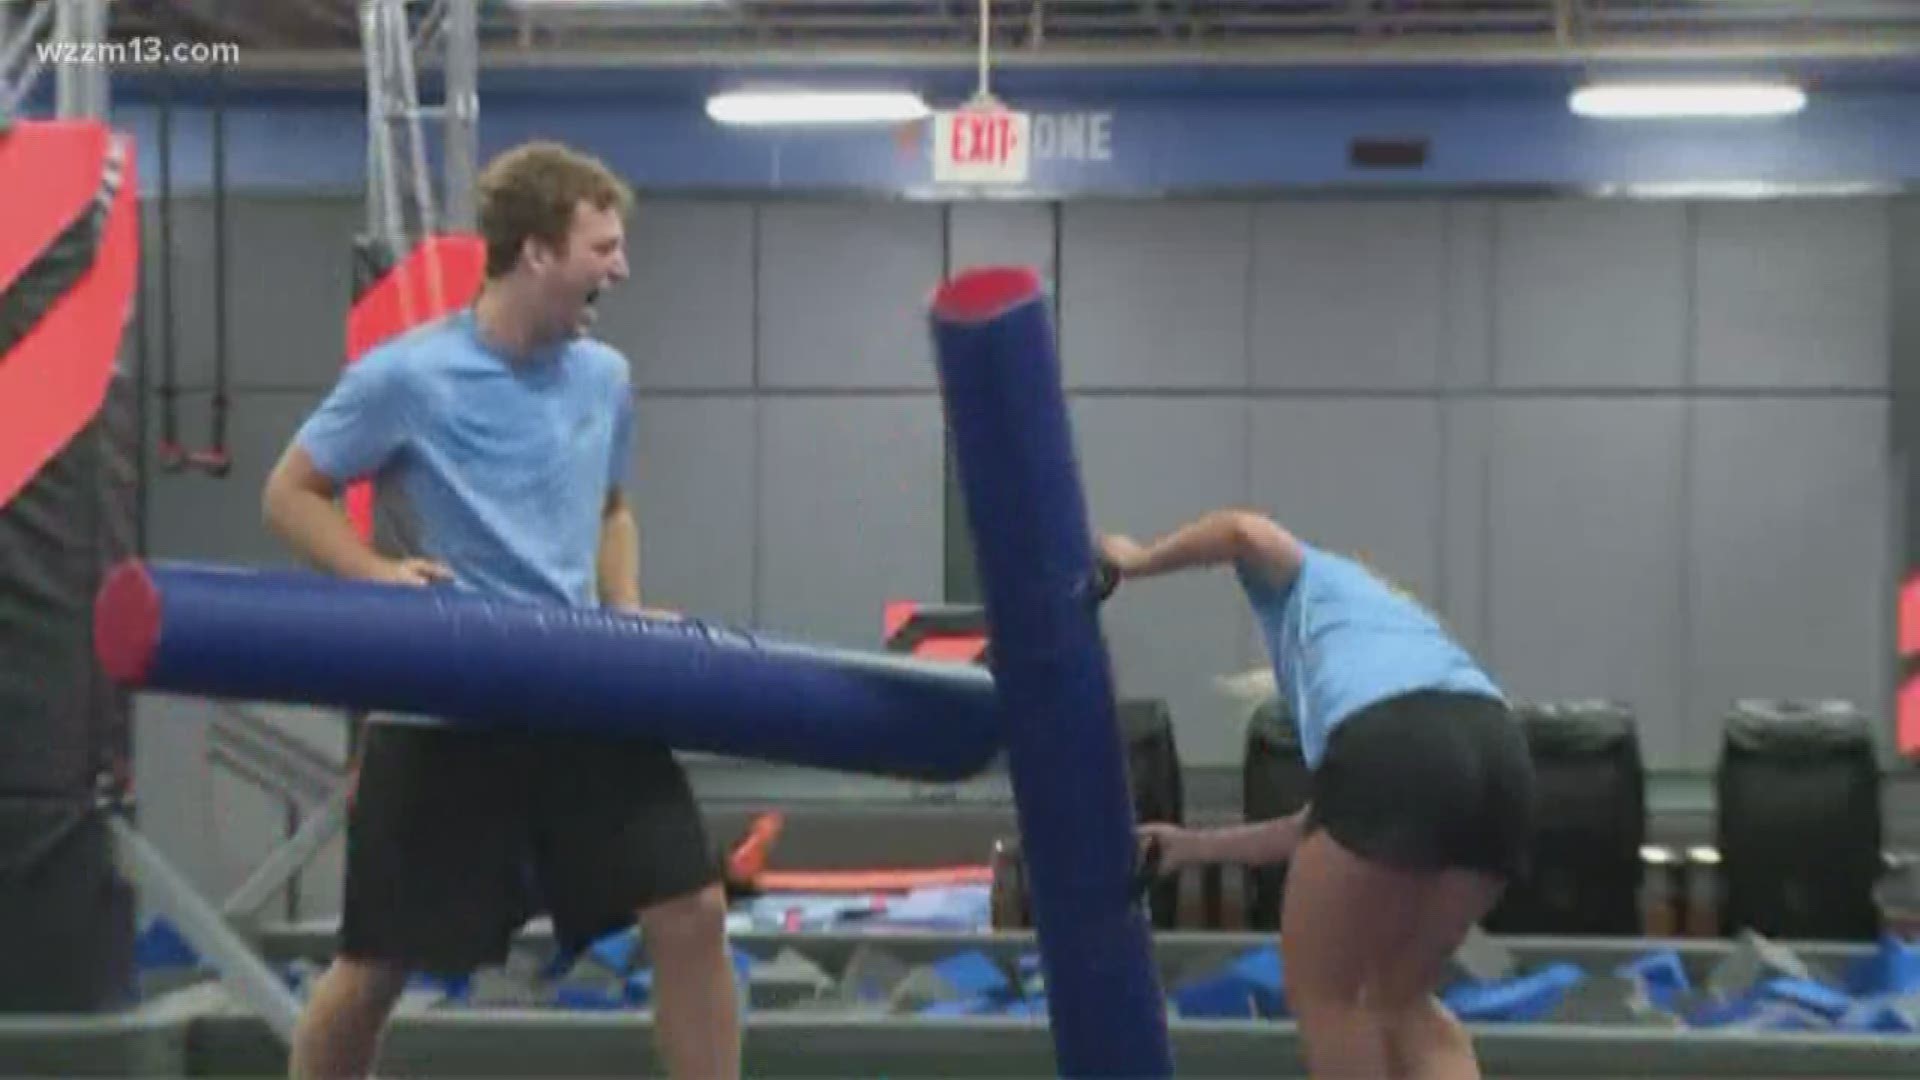 National World Jump day kicks off in Grand Rapids at Skyzone